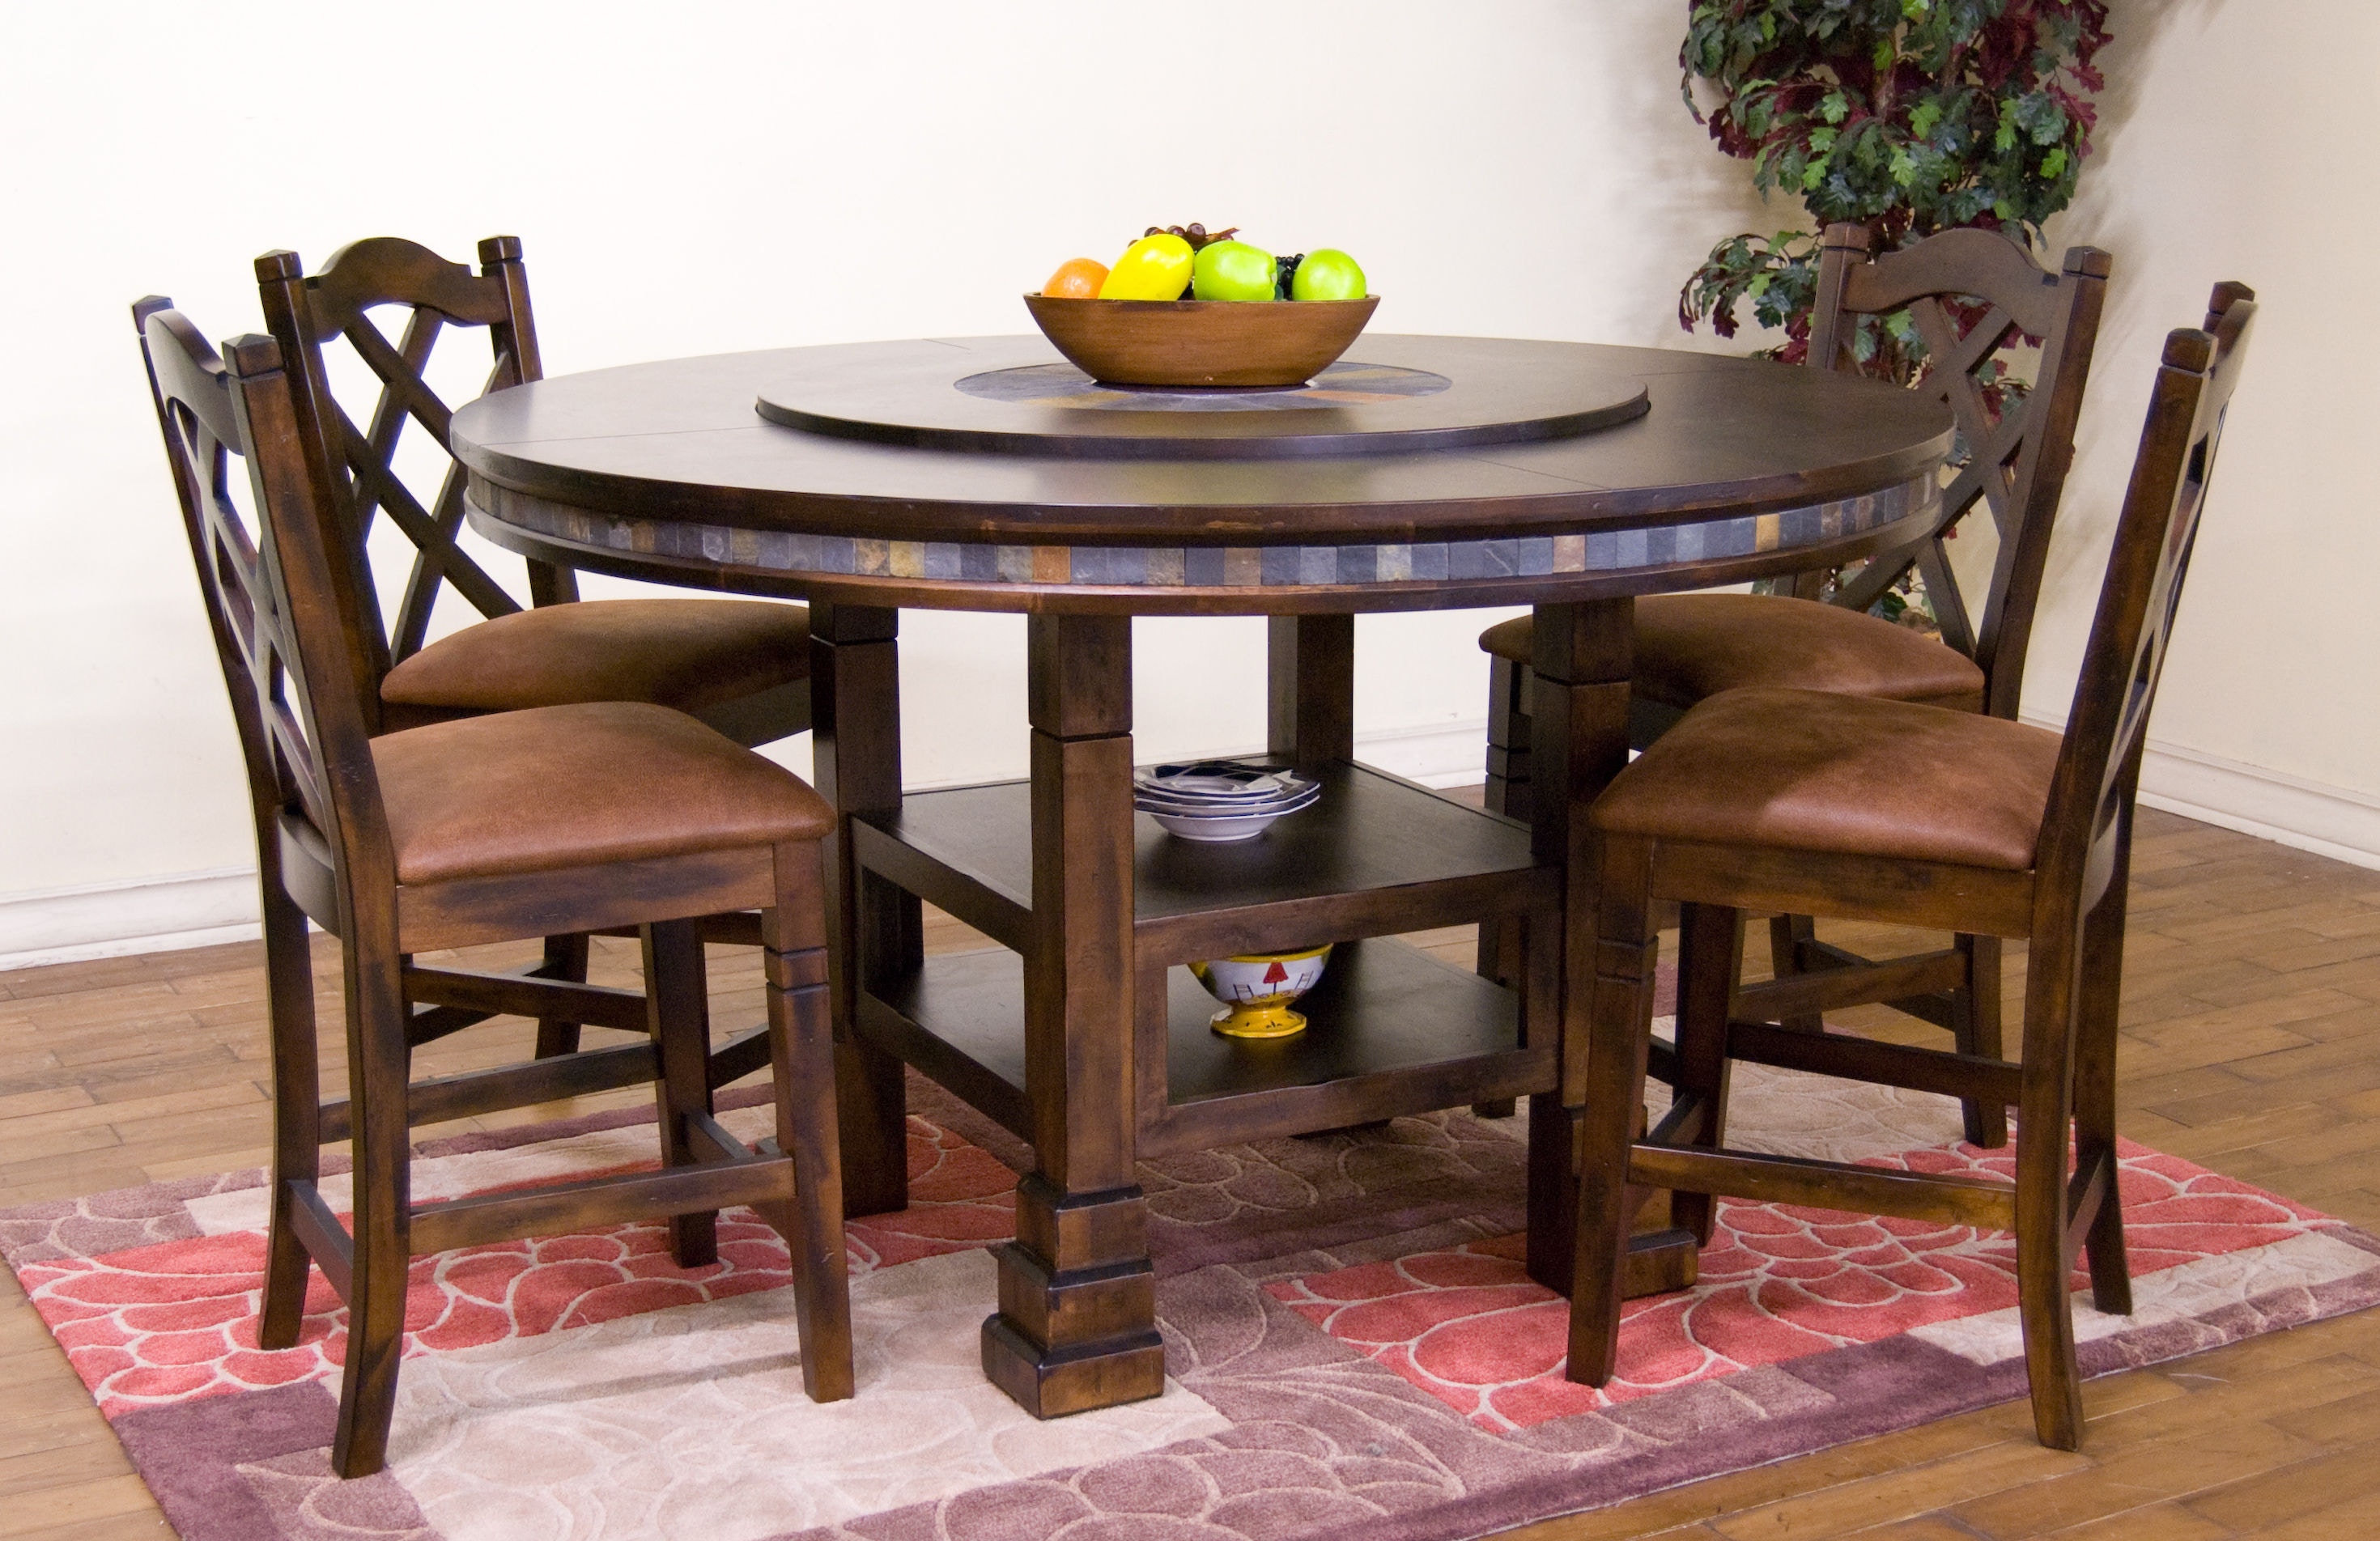 Dining Room Table With Lazy Susan